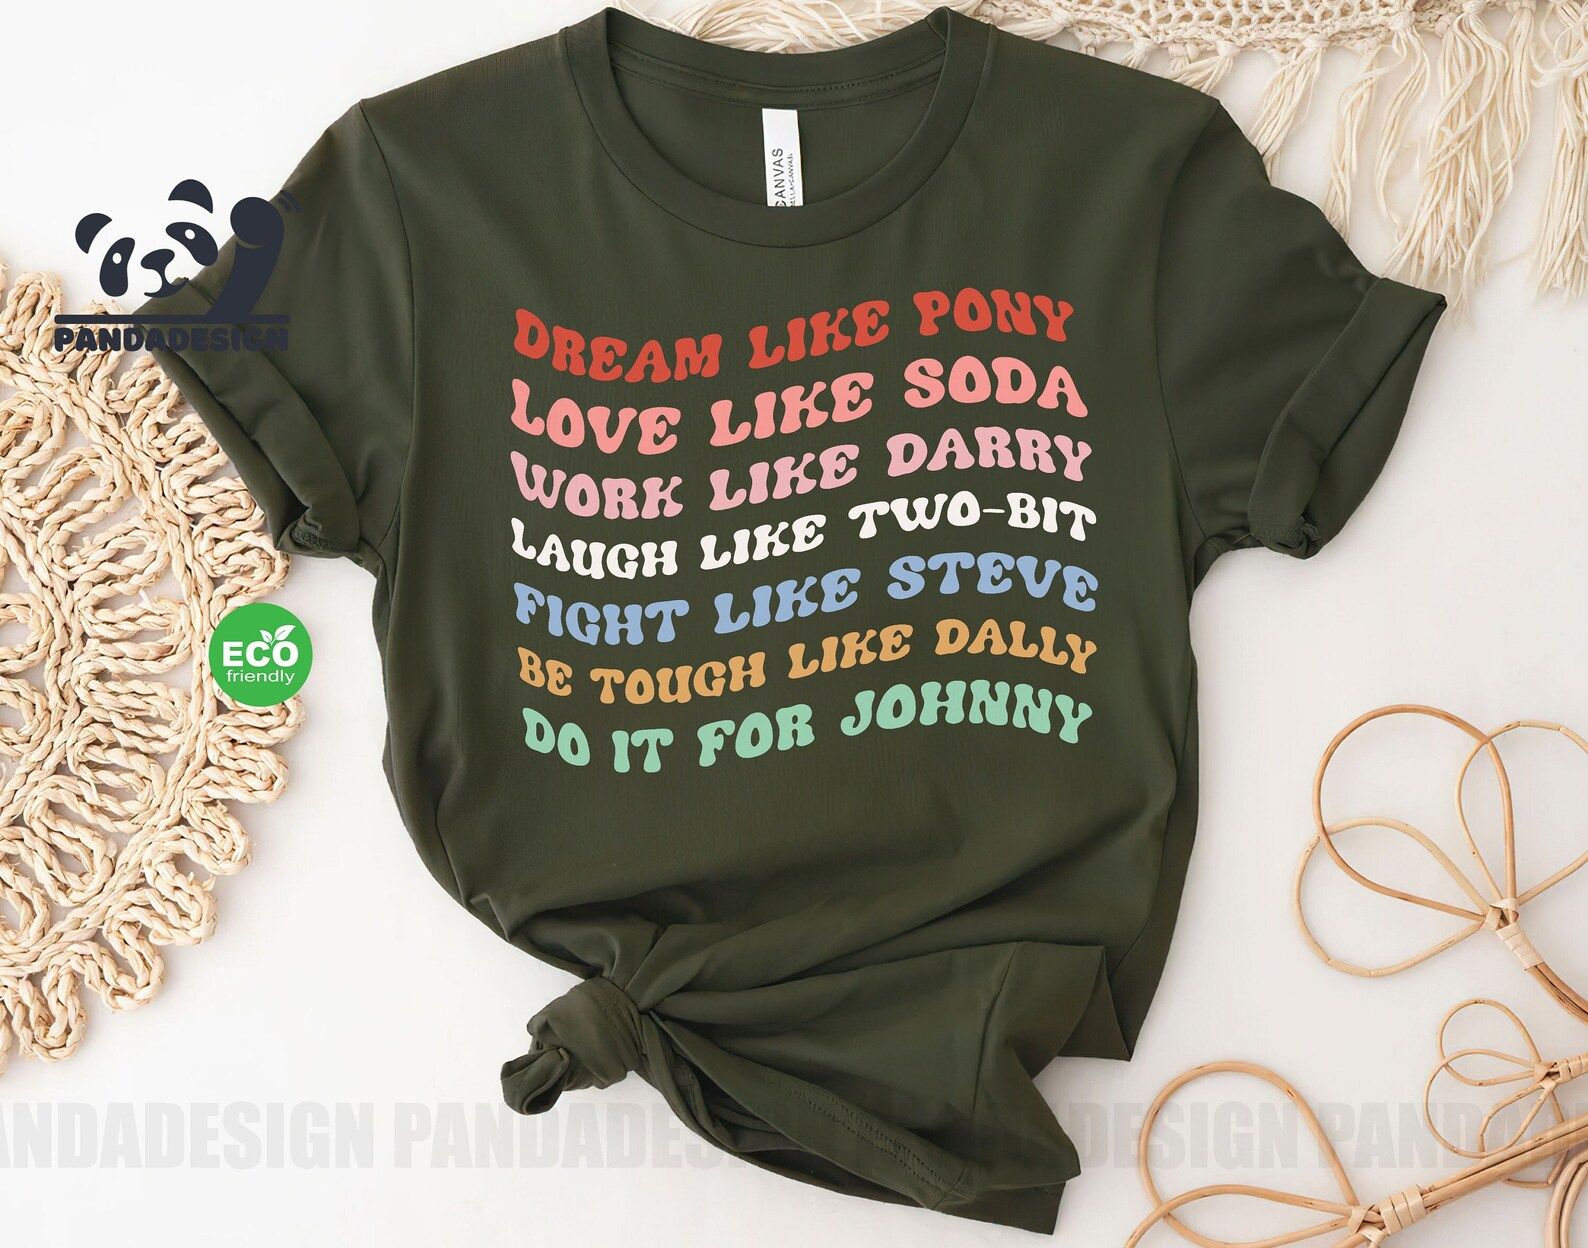 a black shirt in rainbow groovy test that reads : Dream Like Pony, Love Like Soda, Work like Darry, Laugh like Two-Bit, Fight like Steve, Be Tough by Dally, Do it for Johnny.